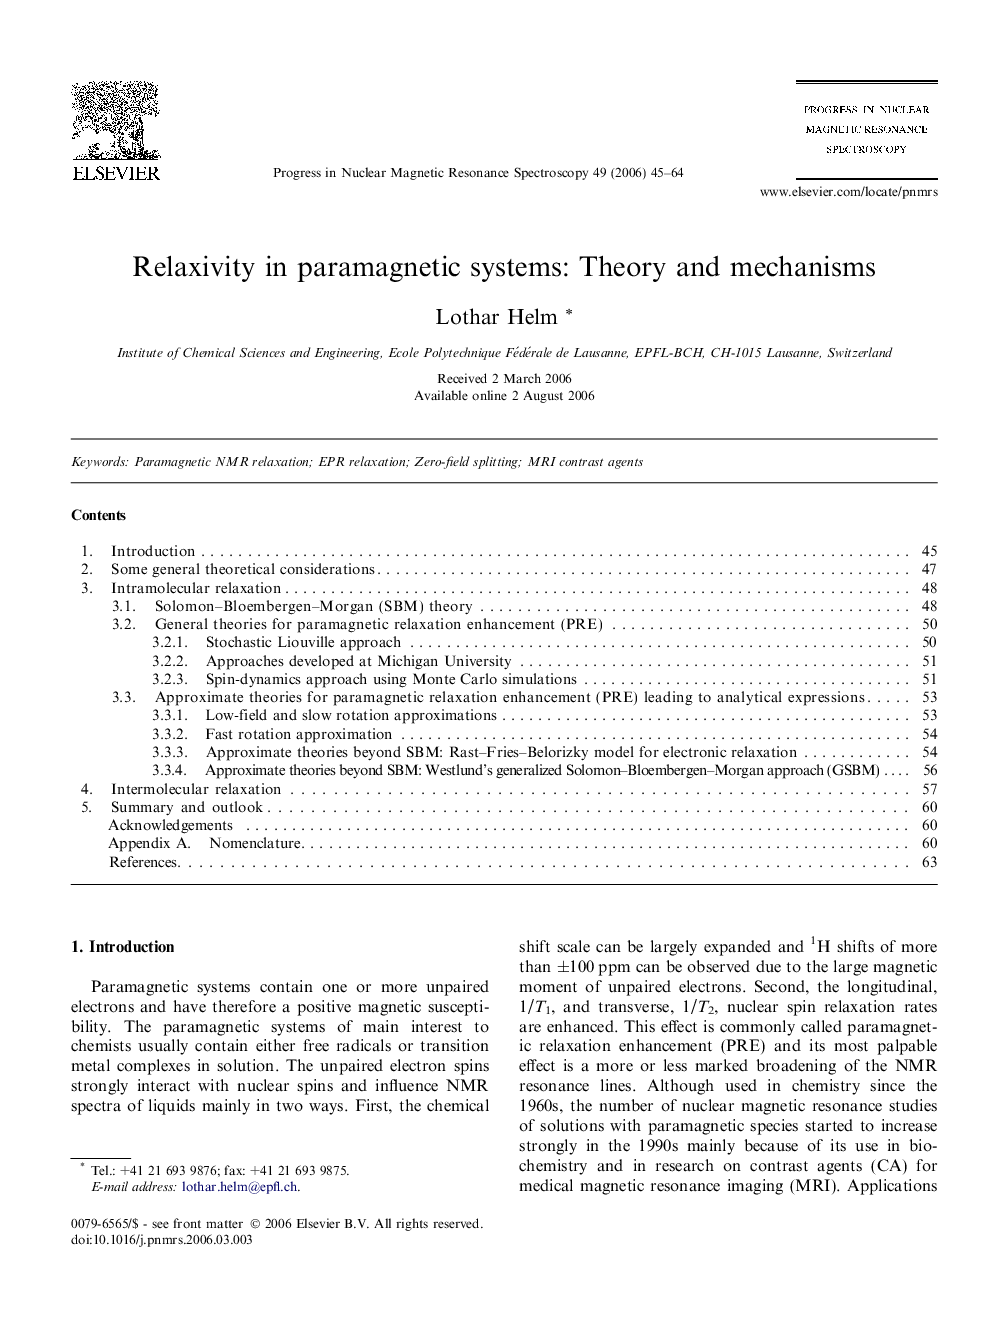 Relaxivity in paramagnetic systems: Theory and mechanisms